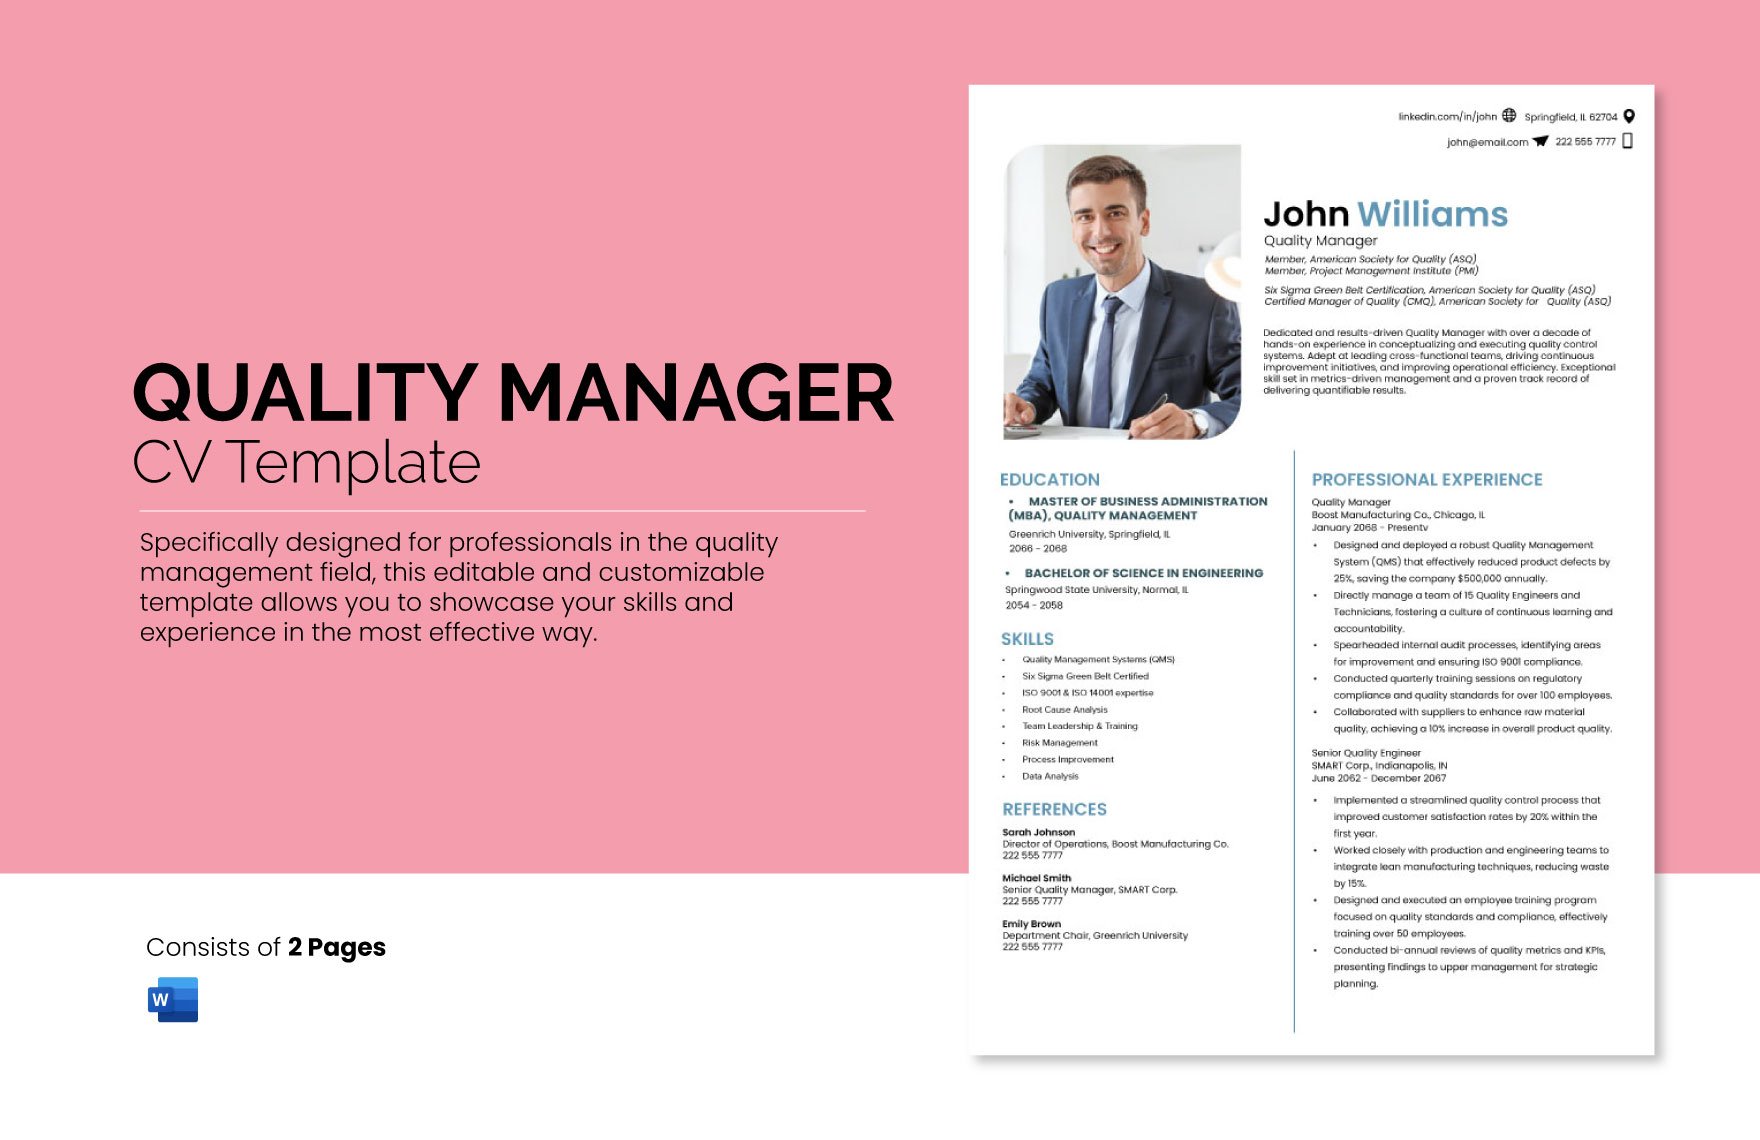 Quality Manager CV Template 